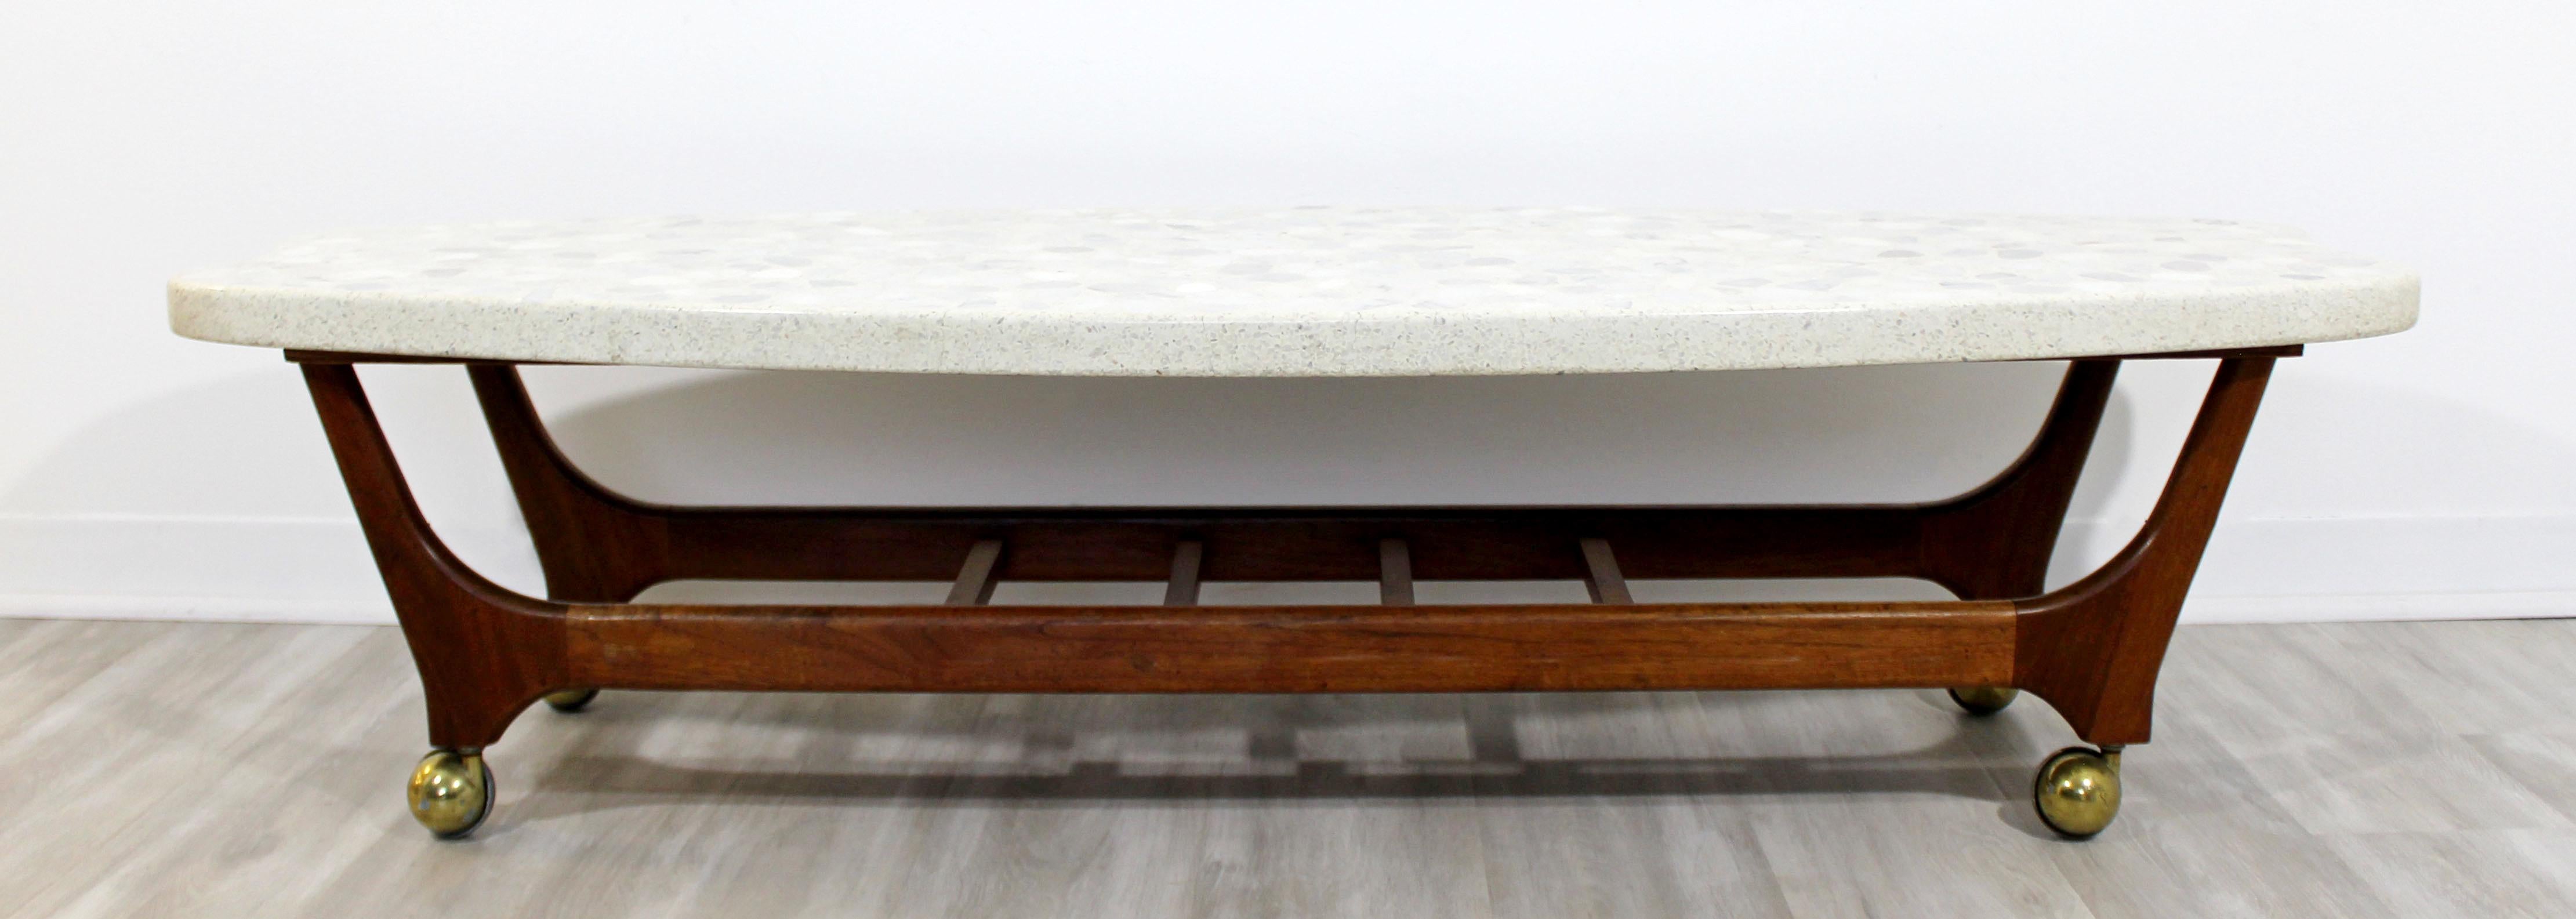 For your consideration is a magnificent, curved coffee table, with a terrazzo travertine stone top on walnut wood base, by Harvey Probber, circa 1960s. In excellent vintage condition. The dimensions are 60